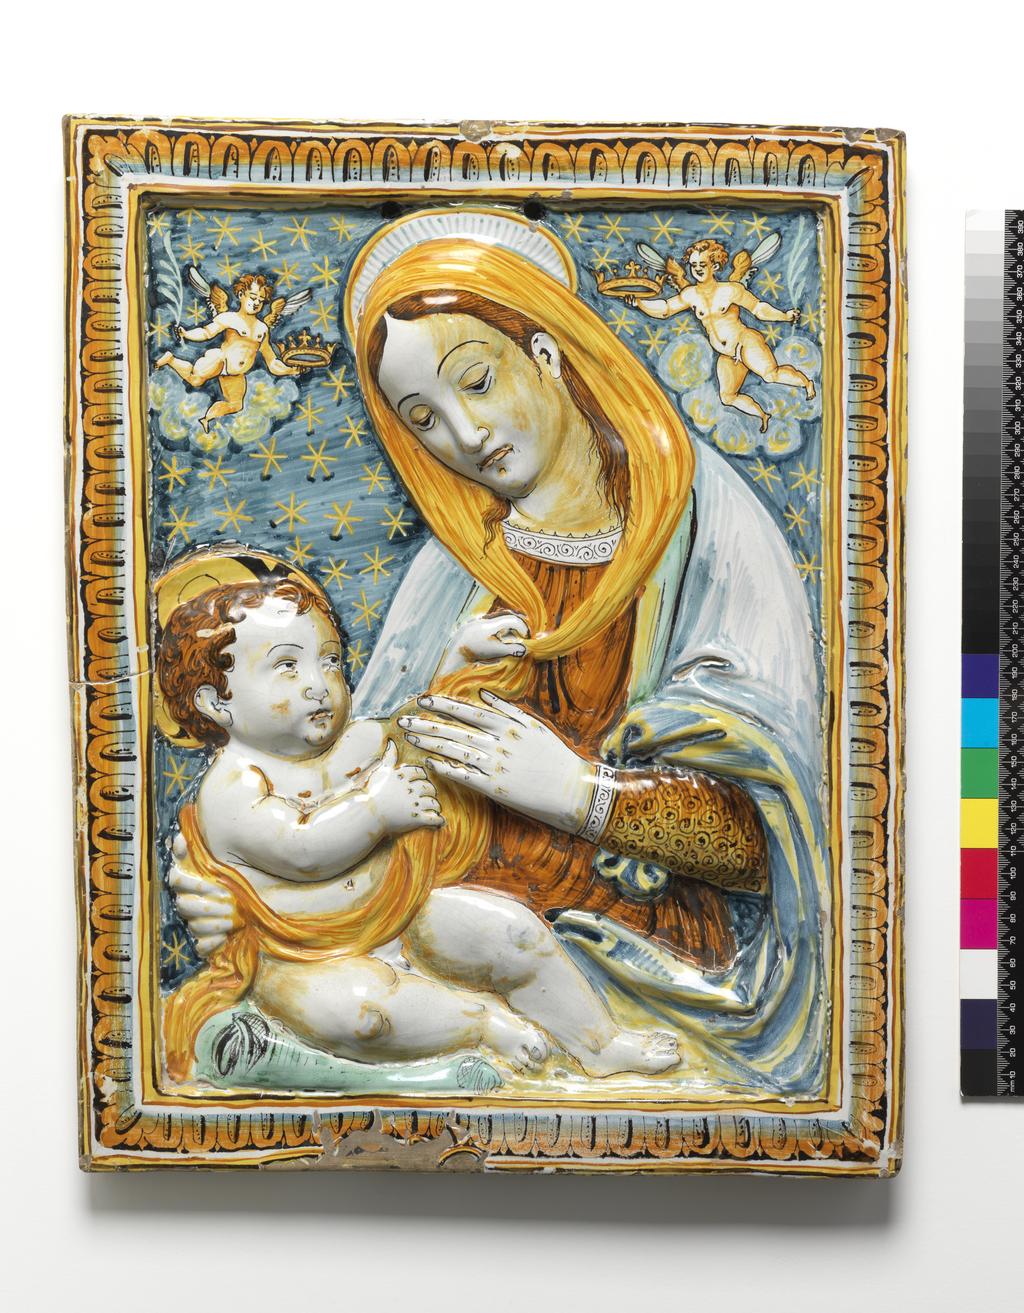 An image of Panel. Virgin and Child. Unknown maker, Umbria, Deruta. Benedetto da Maiano, sculptor, after, (Italian, 1442-1497). Maiolica panel, painted in polychrome with a half-length figure of the Virgin with the infant Christ. Rectangular, with two suspension holes inside the raised frame at top centre. Within a frame of egg and dart ornament is a half-length figure of the Virgin with the infant Christ sitting on a cushion on her lap. He plays with her veil and she restrains Him with her right hand. On each side of the Virgin's head is a cloud with a cherub flying out of it, holding a crown in the hand nearest to her and a palm in the other. The dark blue background is scattered with stars. Buff earthenware, moulded in relief and tin-glazed on the front and sides; the reverse unglazed. The glaze has crawled to the left of bottom centre. Painted in watery dark blue, pale blue, yellow, orange, and dark manganese-brown. Height, whole, 46.5 cm, width, whole, 37.0 cm, depth, whole, 3.0 cm, circa 1600-1700. Renaissance.